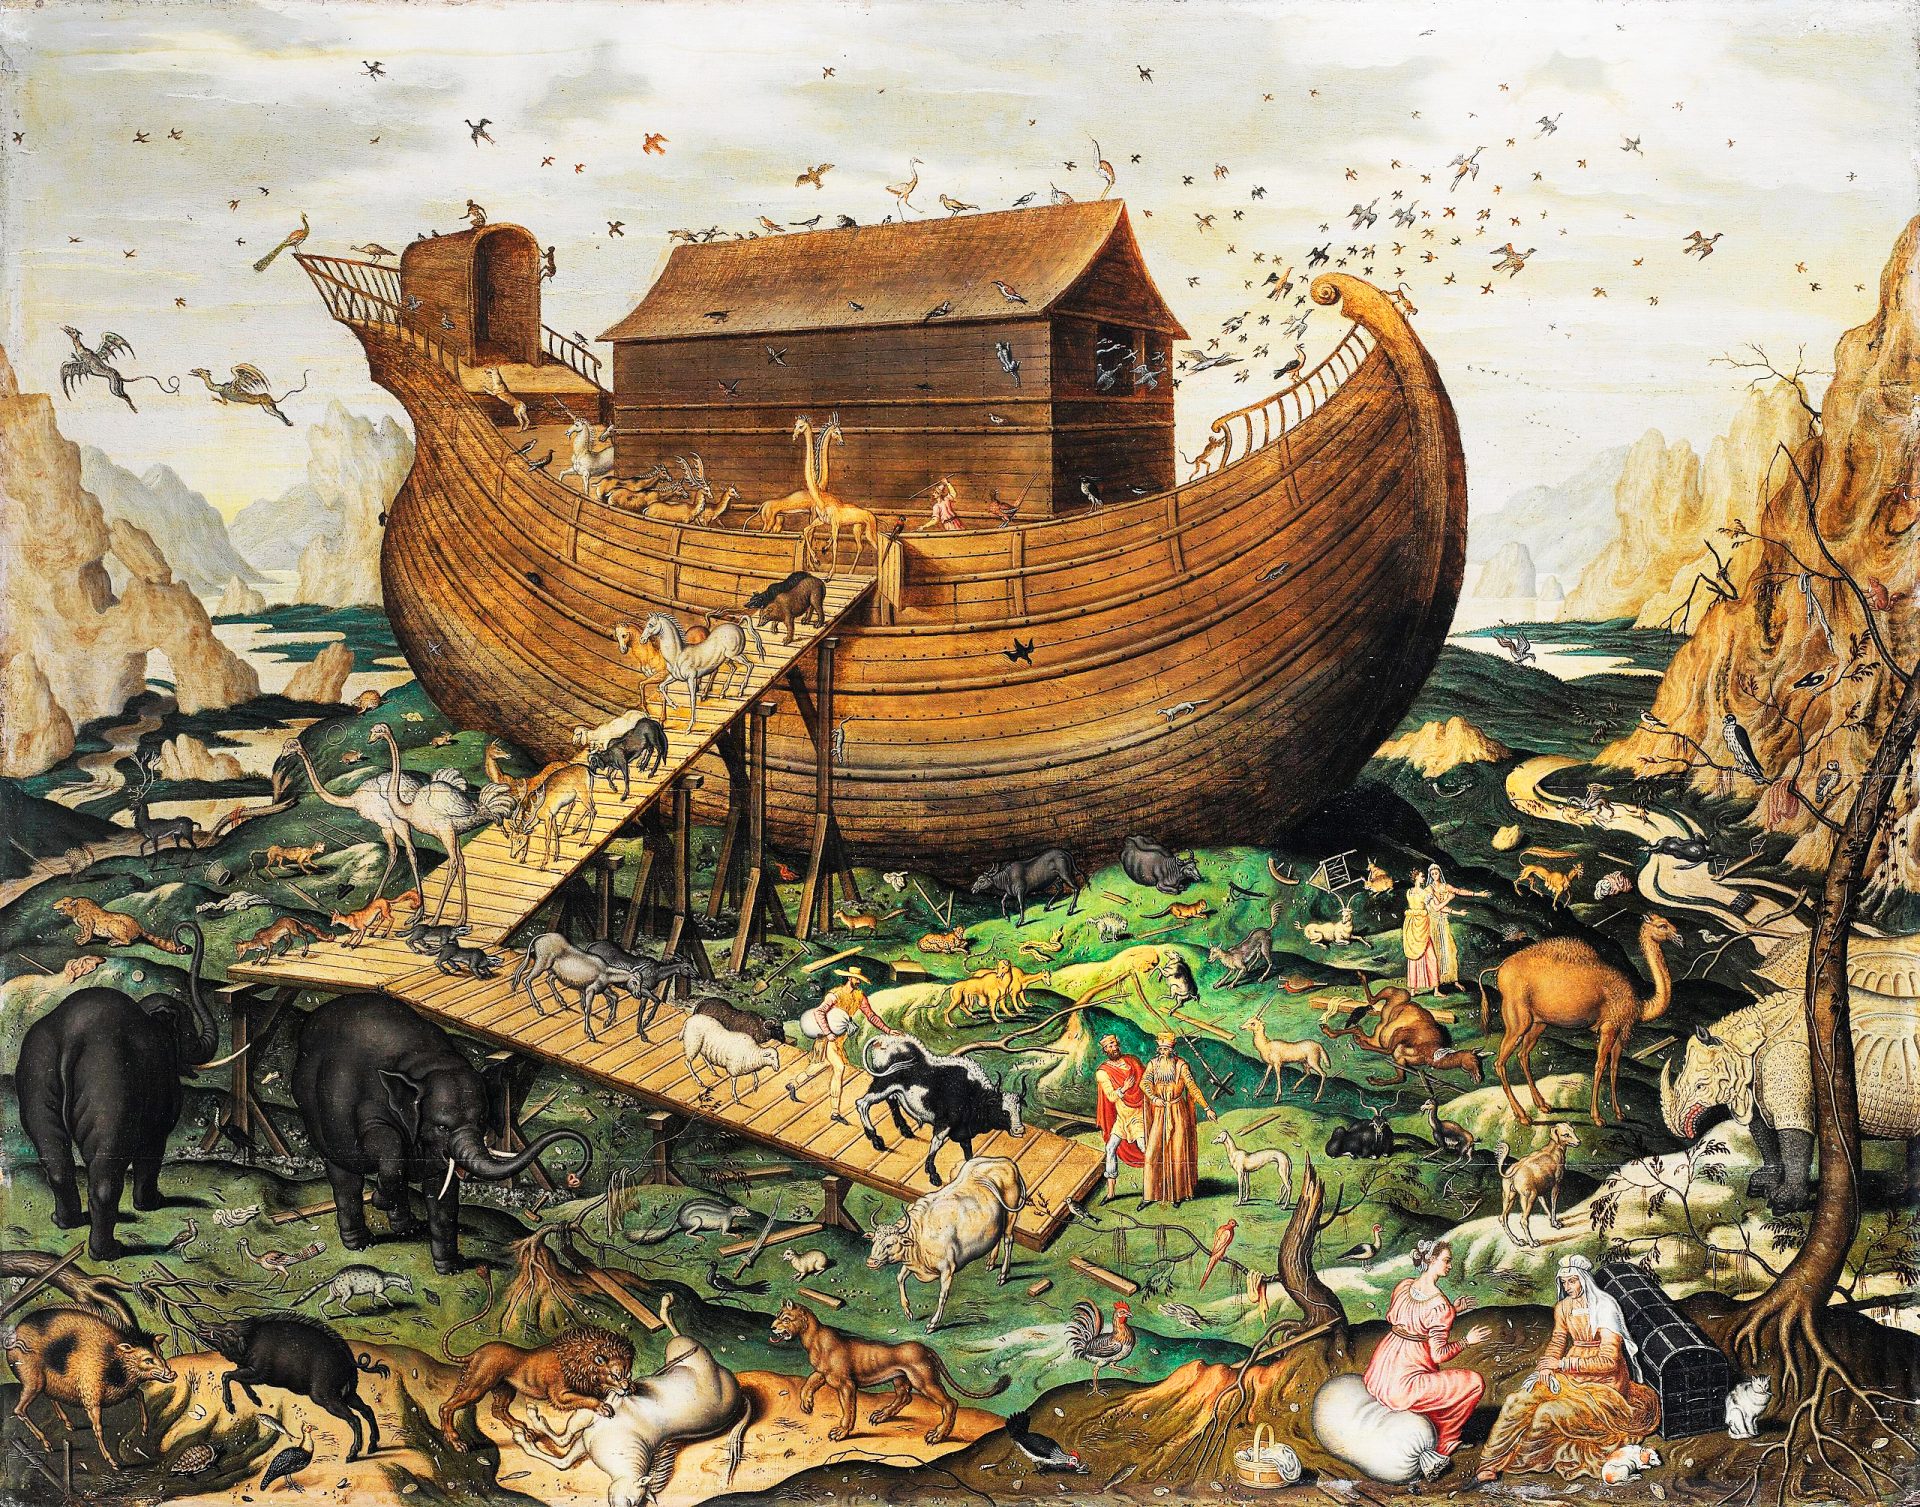 A painting of Noah’s Ark on Mount Ararat with various animals and people around it. The ark is a large wooden boat with a house-like structure on top. The background shows mountains and a cloudy sky. The painting is in a realistic style and a muted color palette. The image depicts a biblical scene of the great flood.